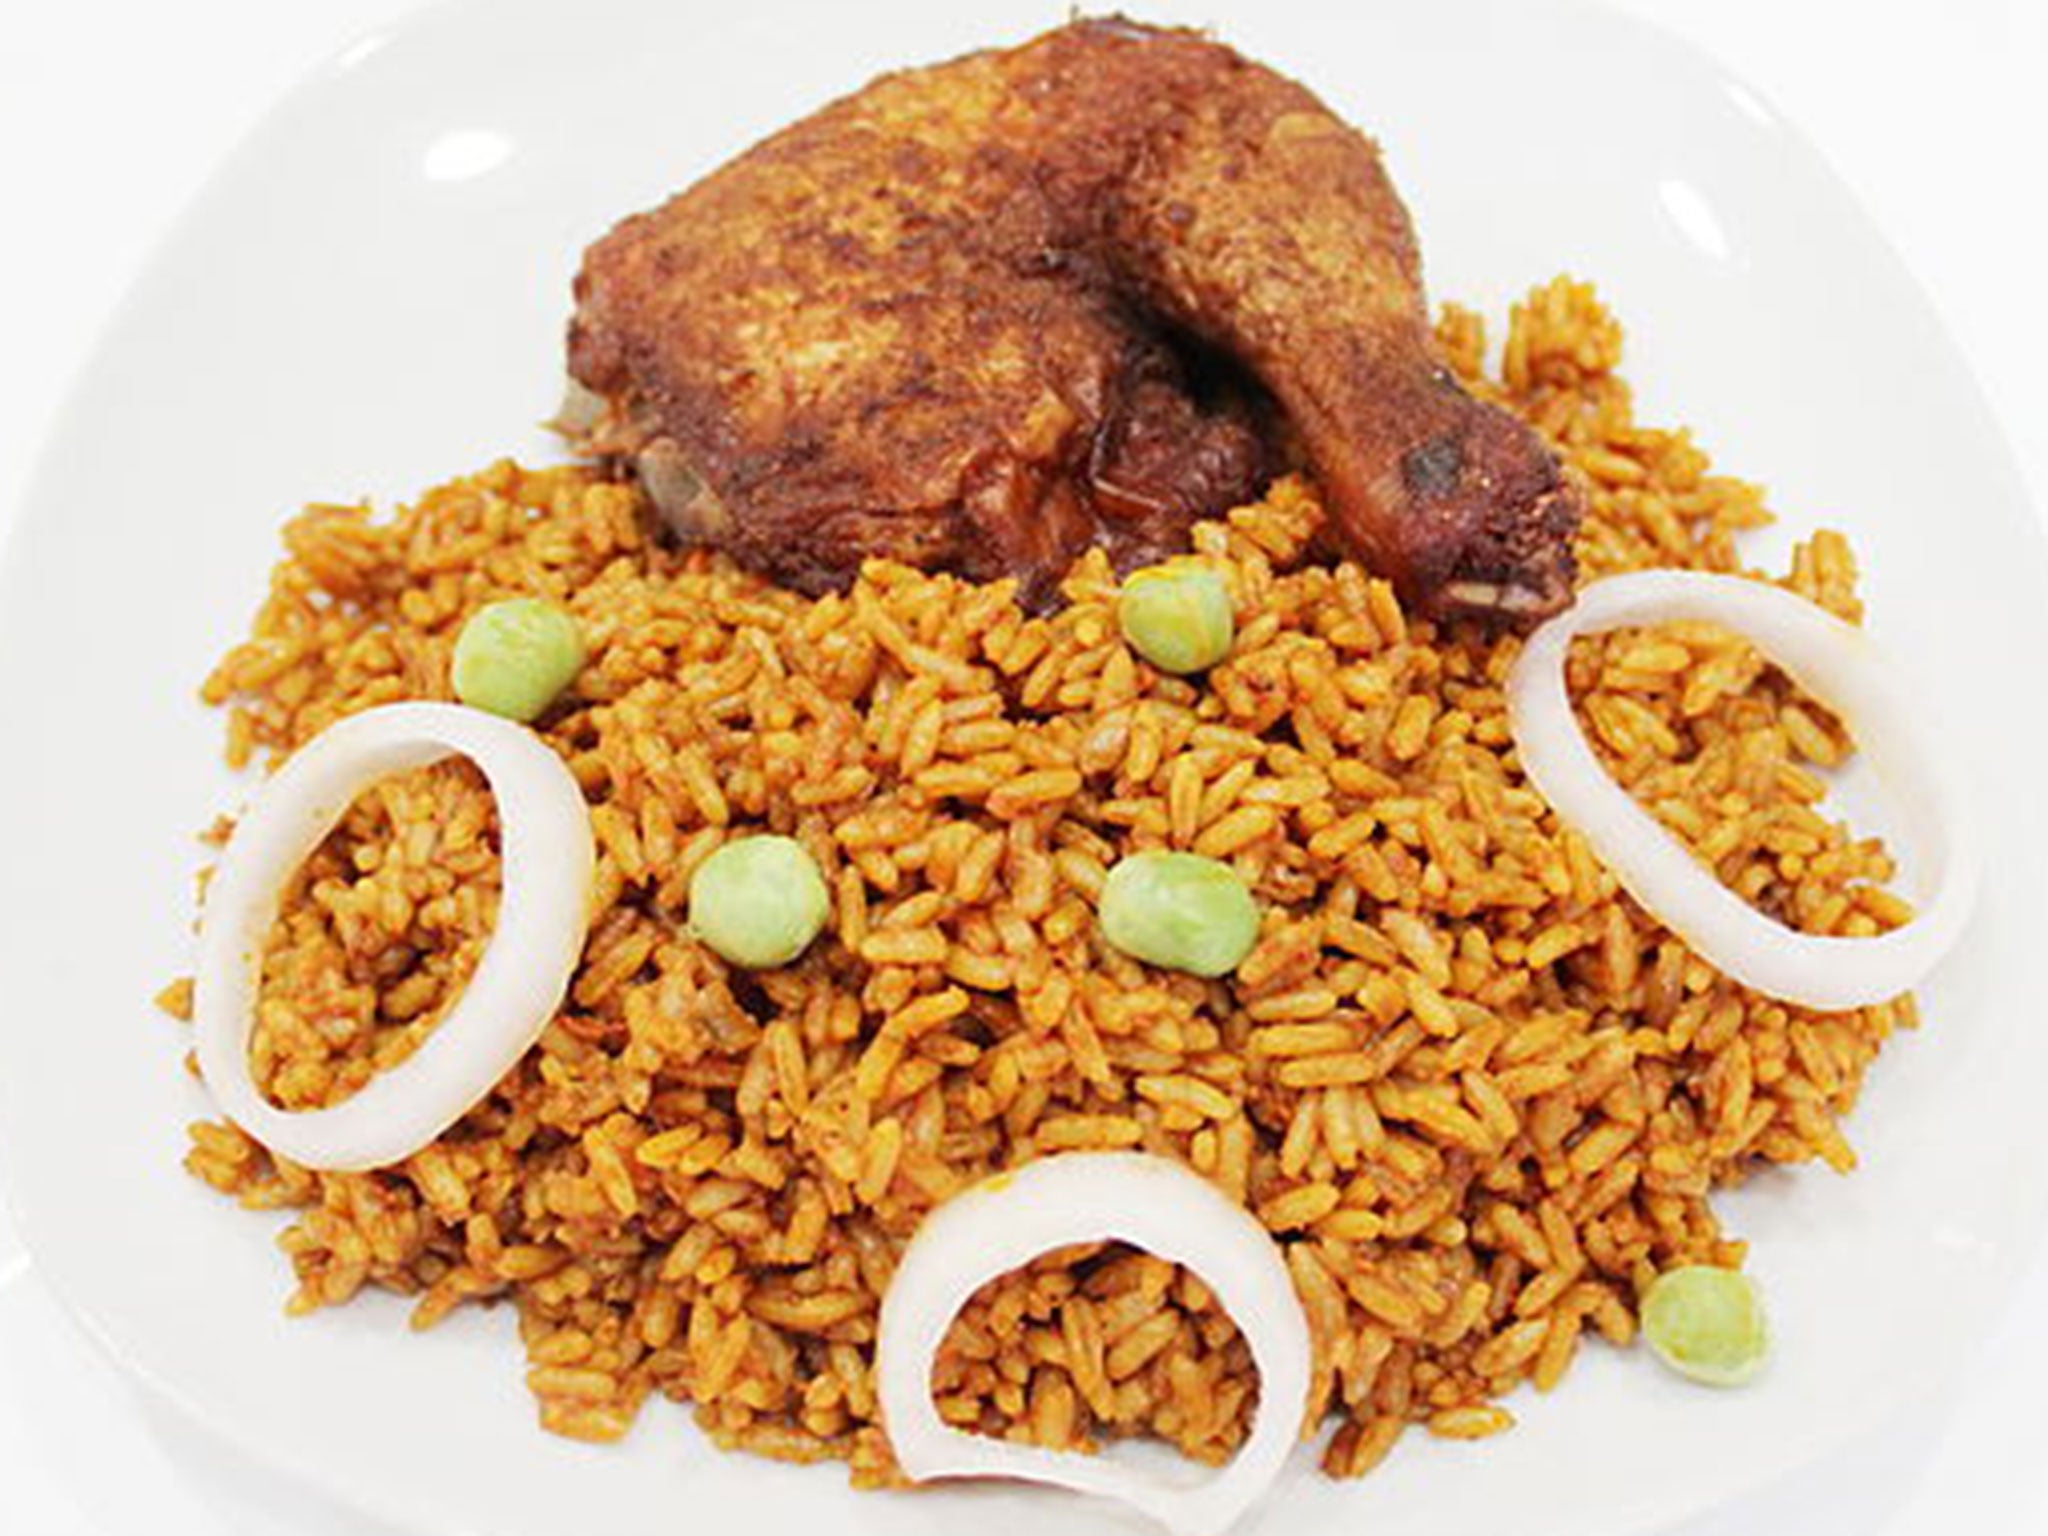 Spiced jollof rice is a staple of West African food